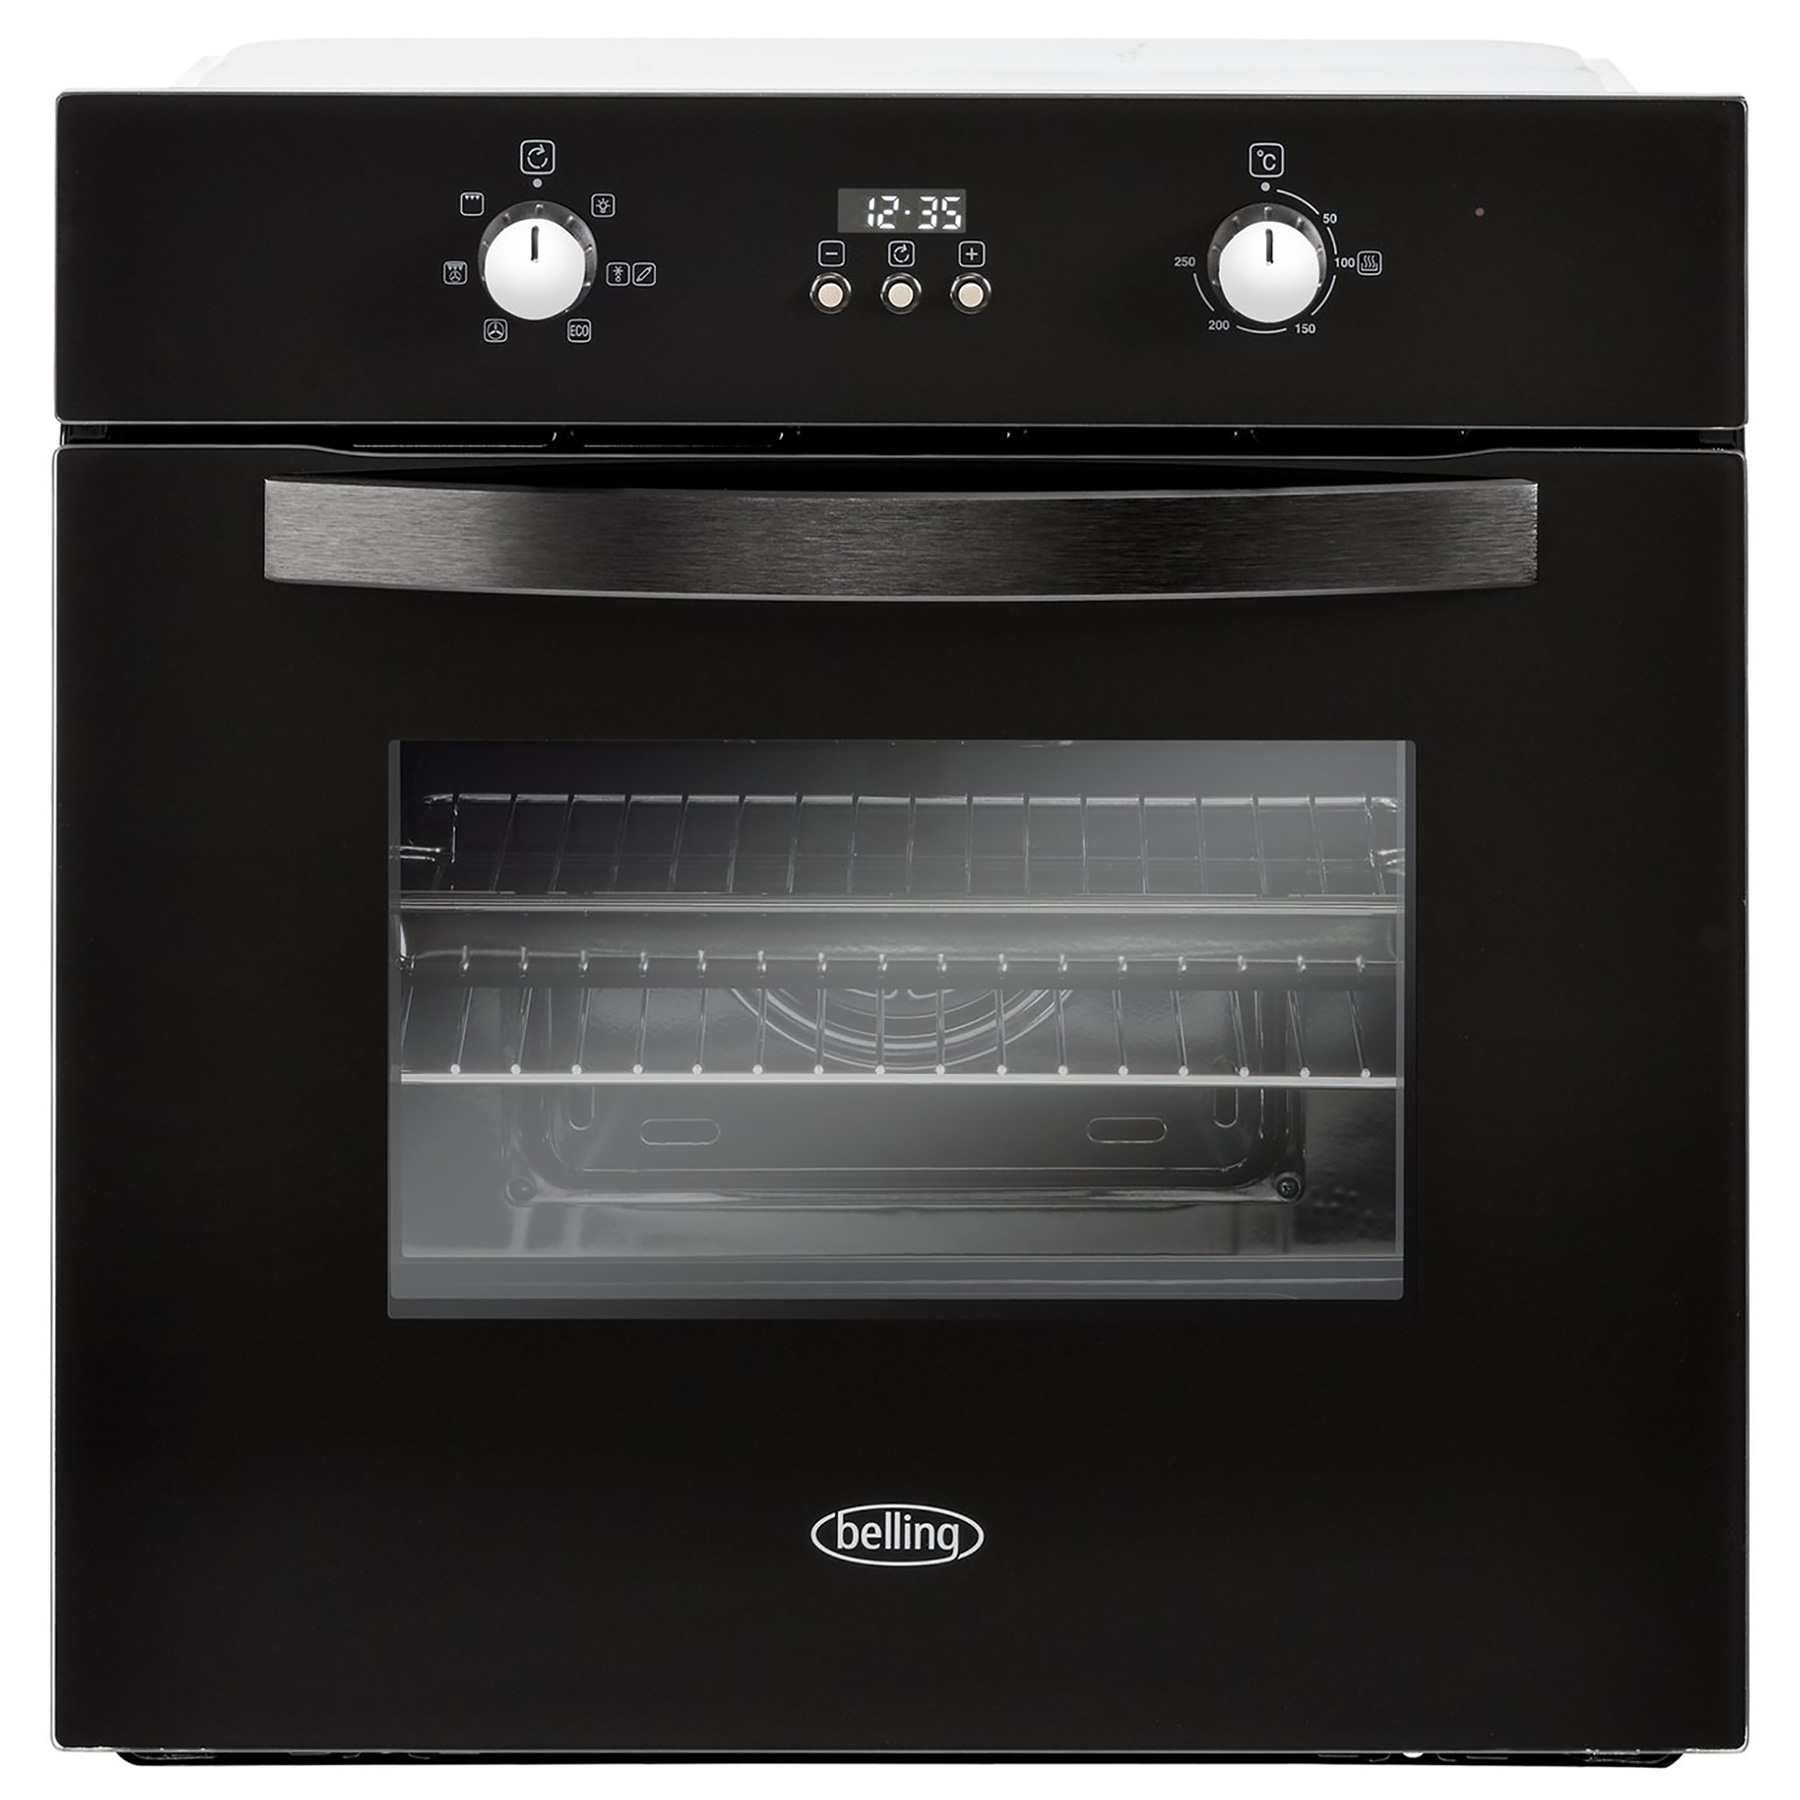 Belling 444410815 Built In Electric Single Oven in Black 70L A Rated